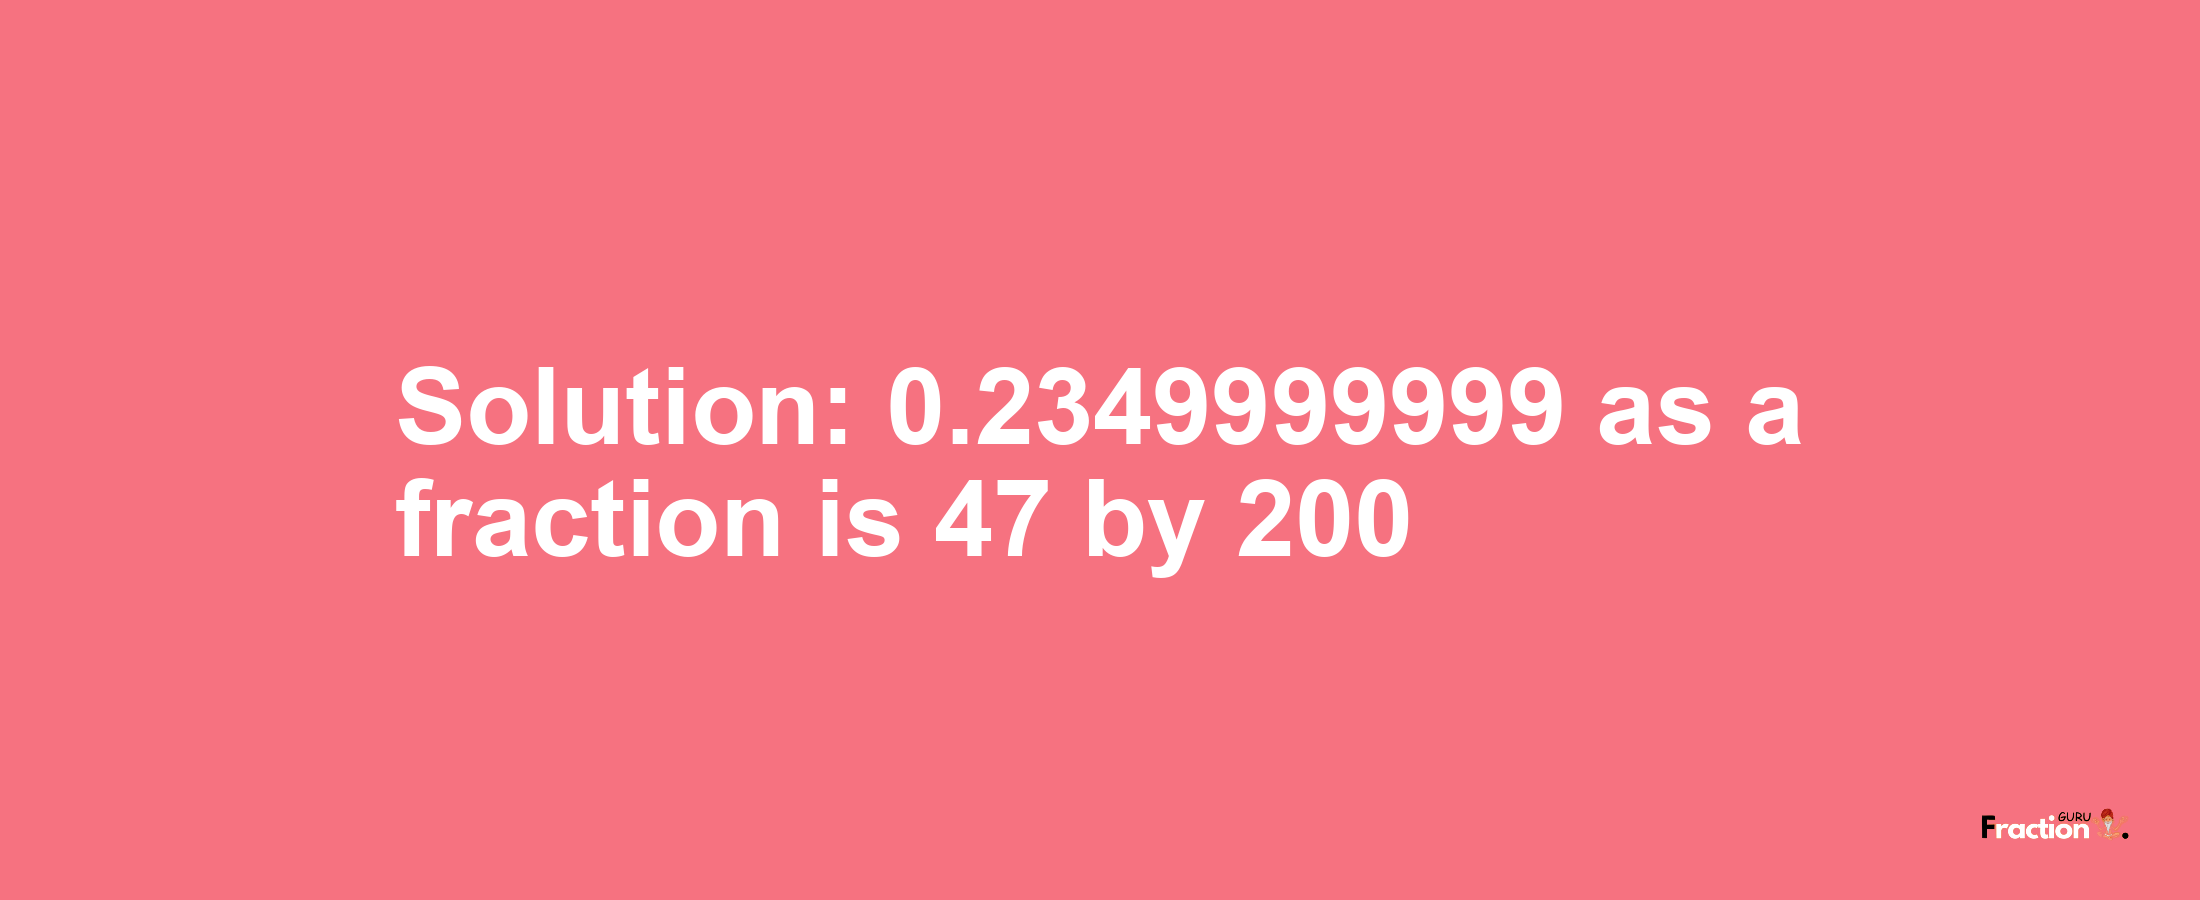 Solution:0.2349999999 as a fraction is 47/200